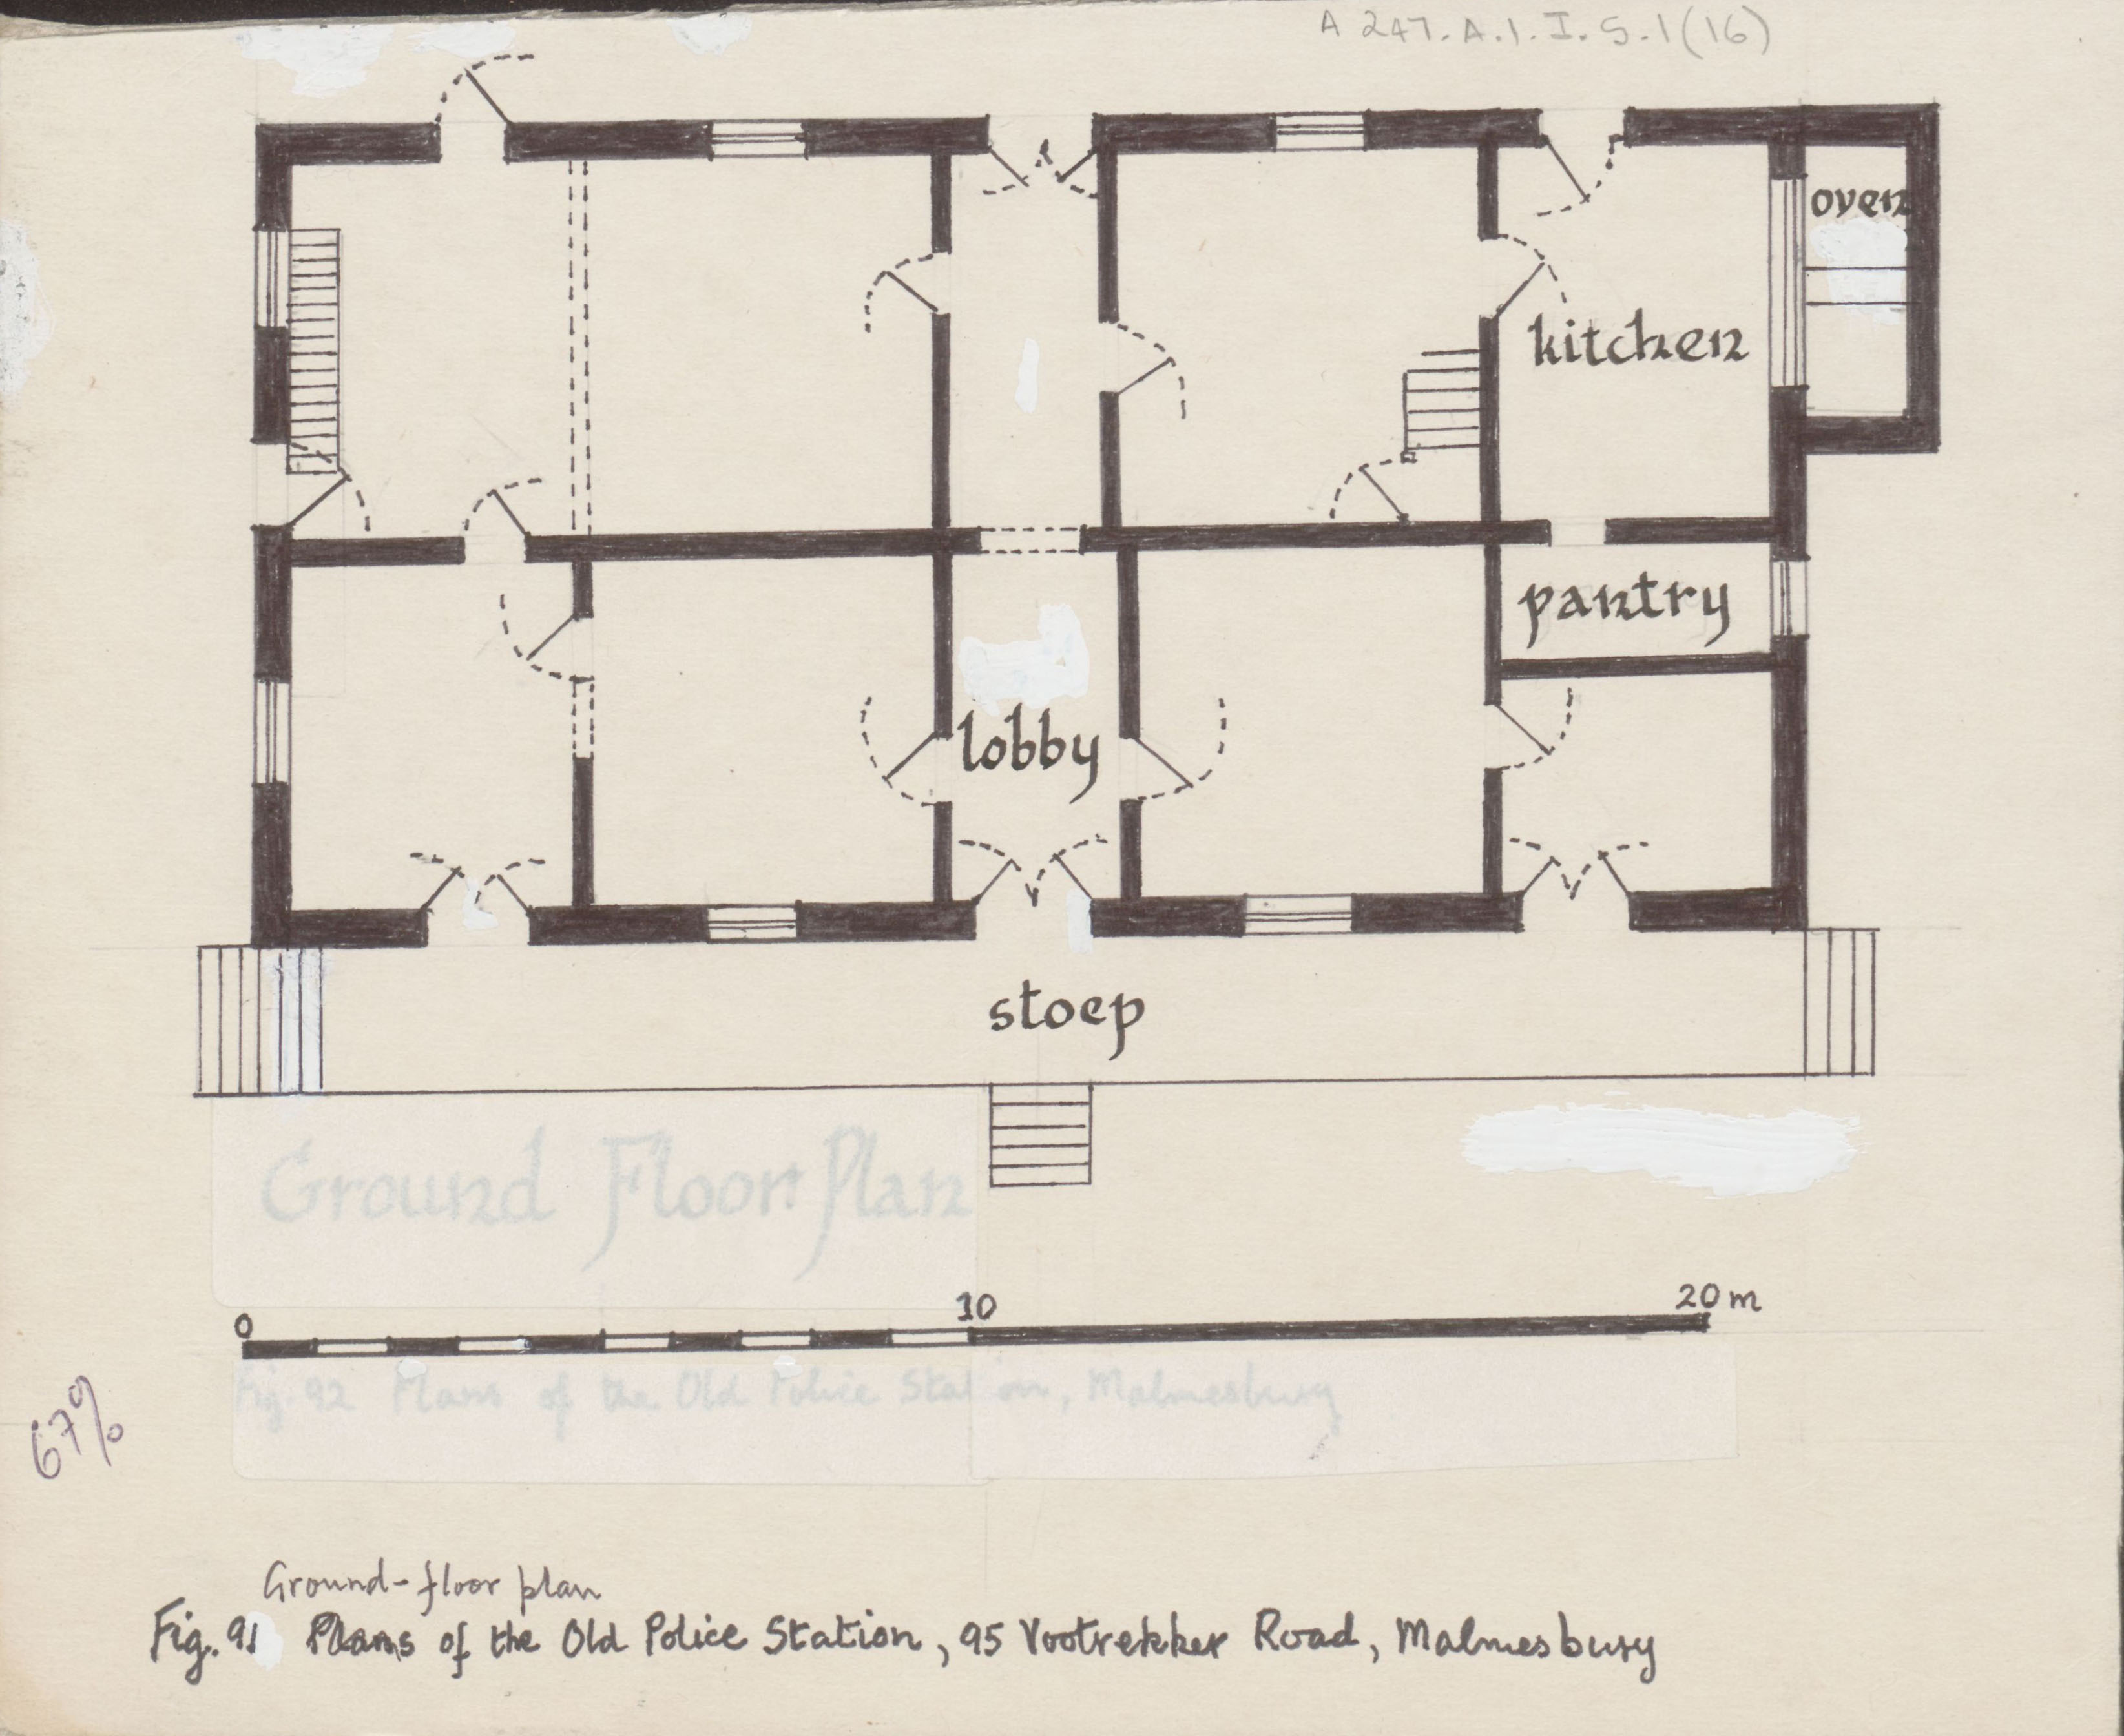 Groundfloor plan of the old Police Station, 95